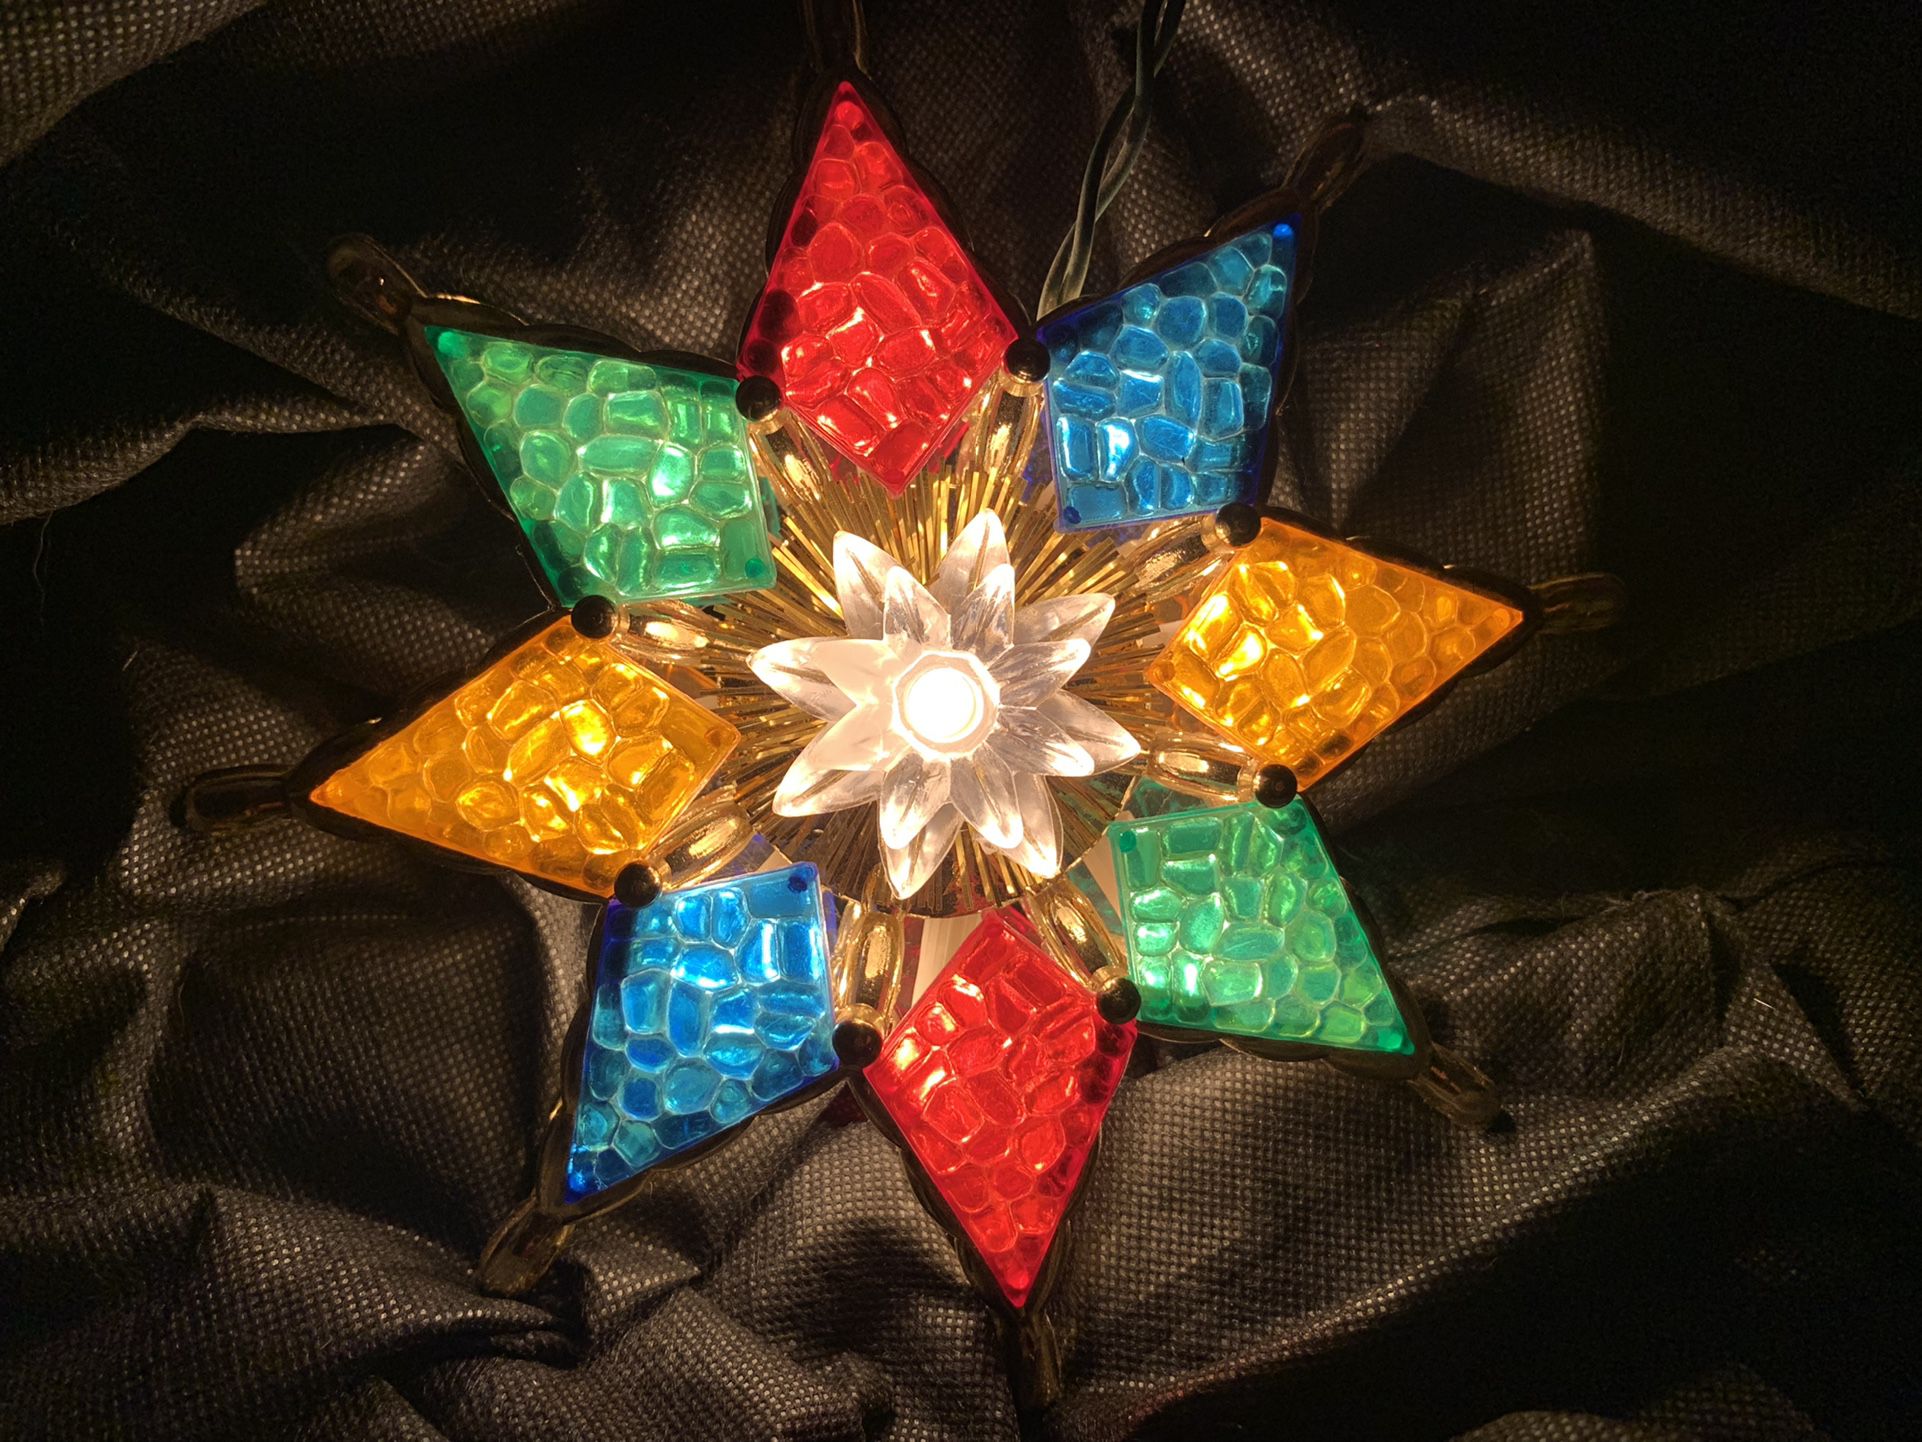  Lighted 8 Point Star Christmas Tree Topper Stained Glass Look Multi Color. Brand new, never used. Box has been misplaced. 8 Inches.